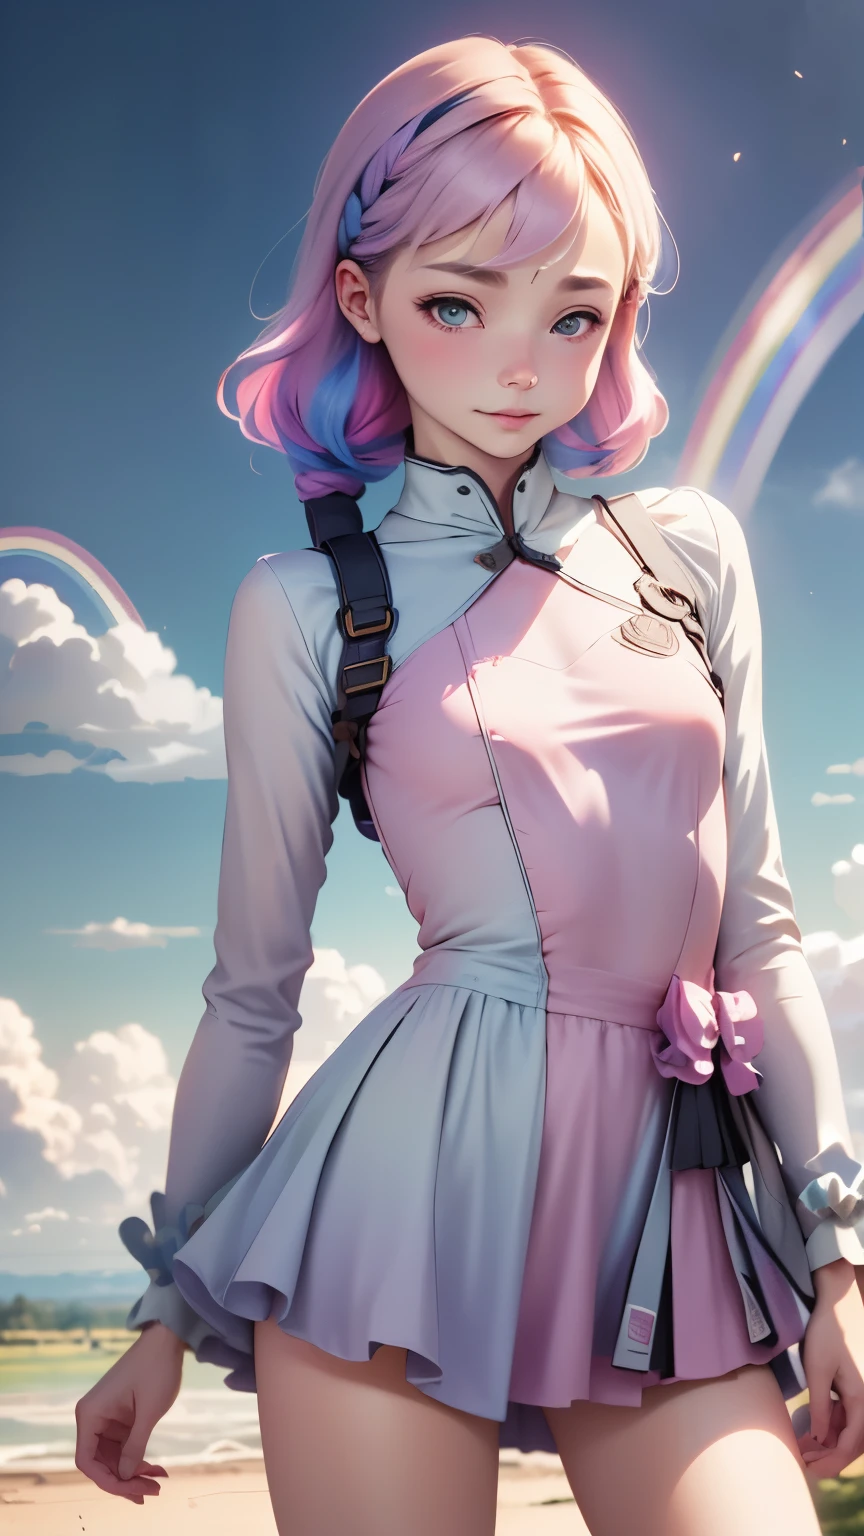 one girl、１２talent、Magical girl、anatomy、french braid、anime style、small breasts、cute face、cute clothes、combat uniform、、(((The background is pastel colored clouds:1.5、rainbow、blurred background)))、highest quality、High resolution、High resolution、cinematic lighting、professional photographer